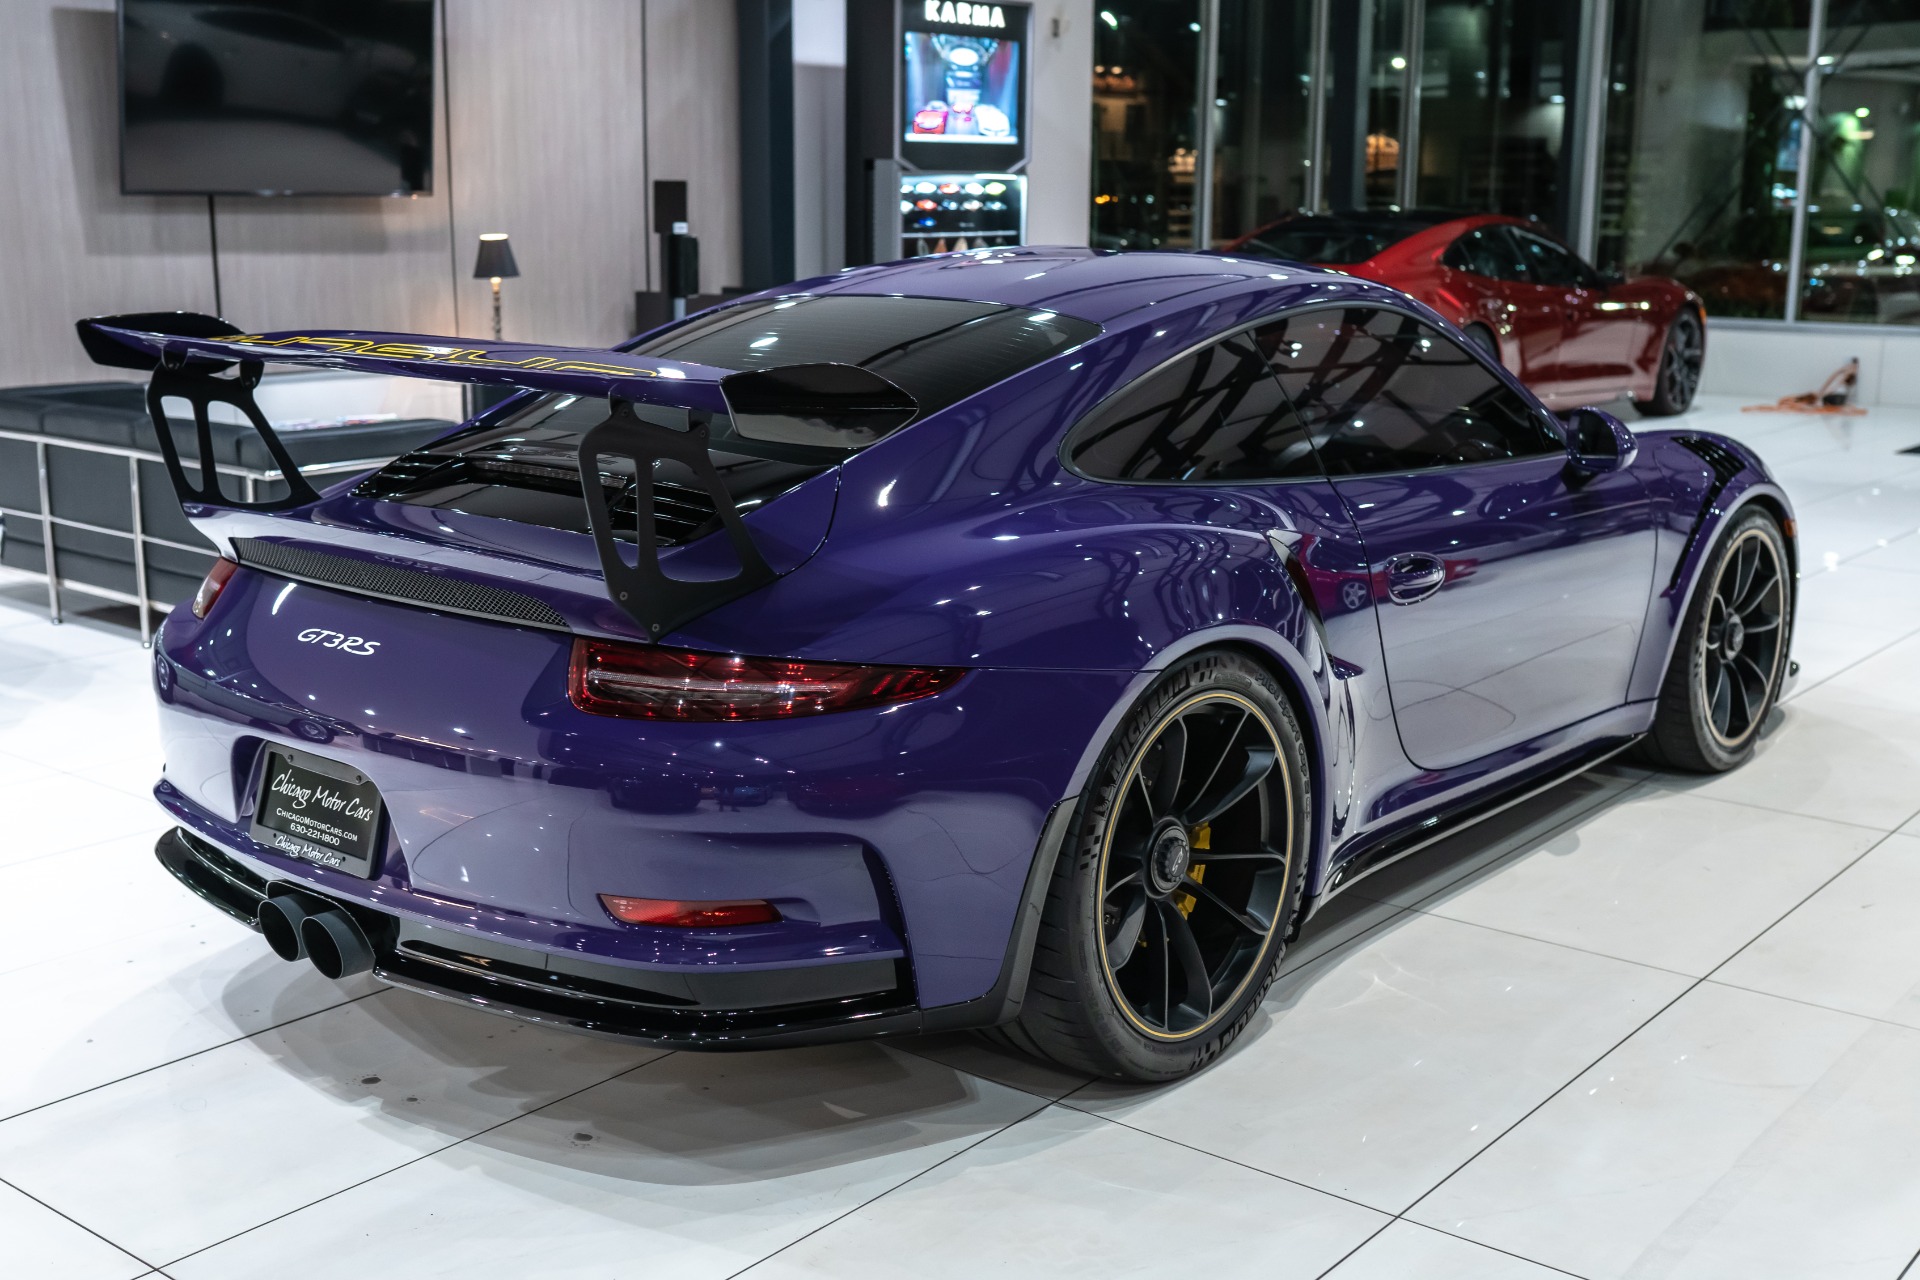 Used-2016-Porsche-911-GT3-RS-Coupe-Ultraviolet-LOW-Miles-PCCB-Shark-Werks-Exhaust-Front-PPF